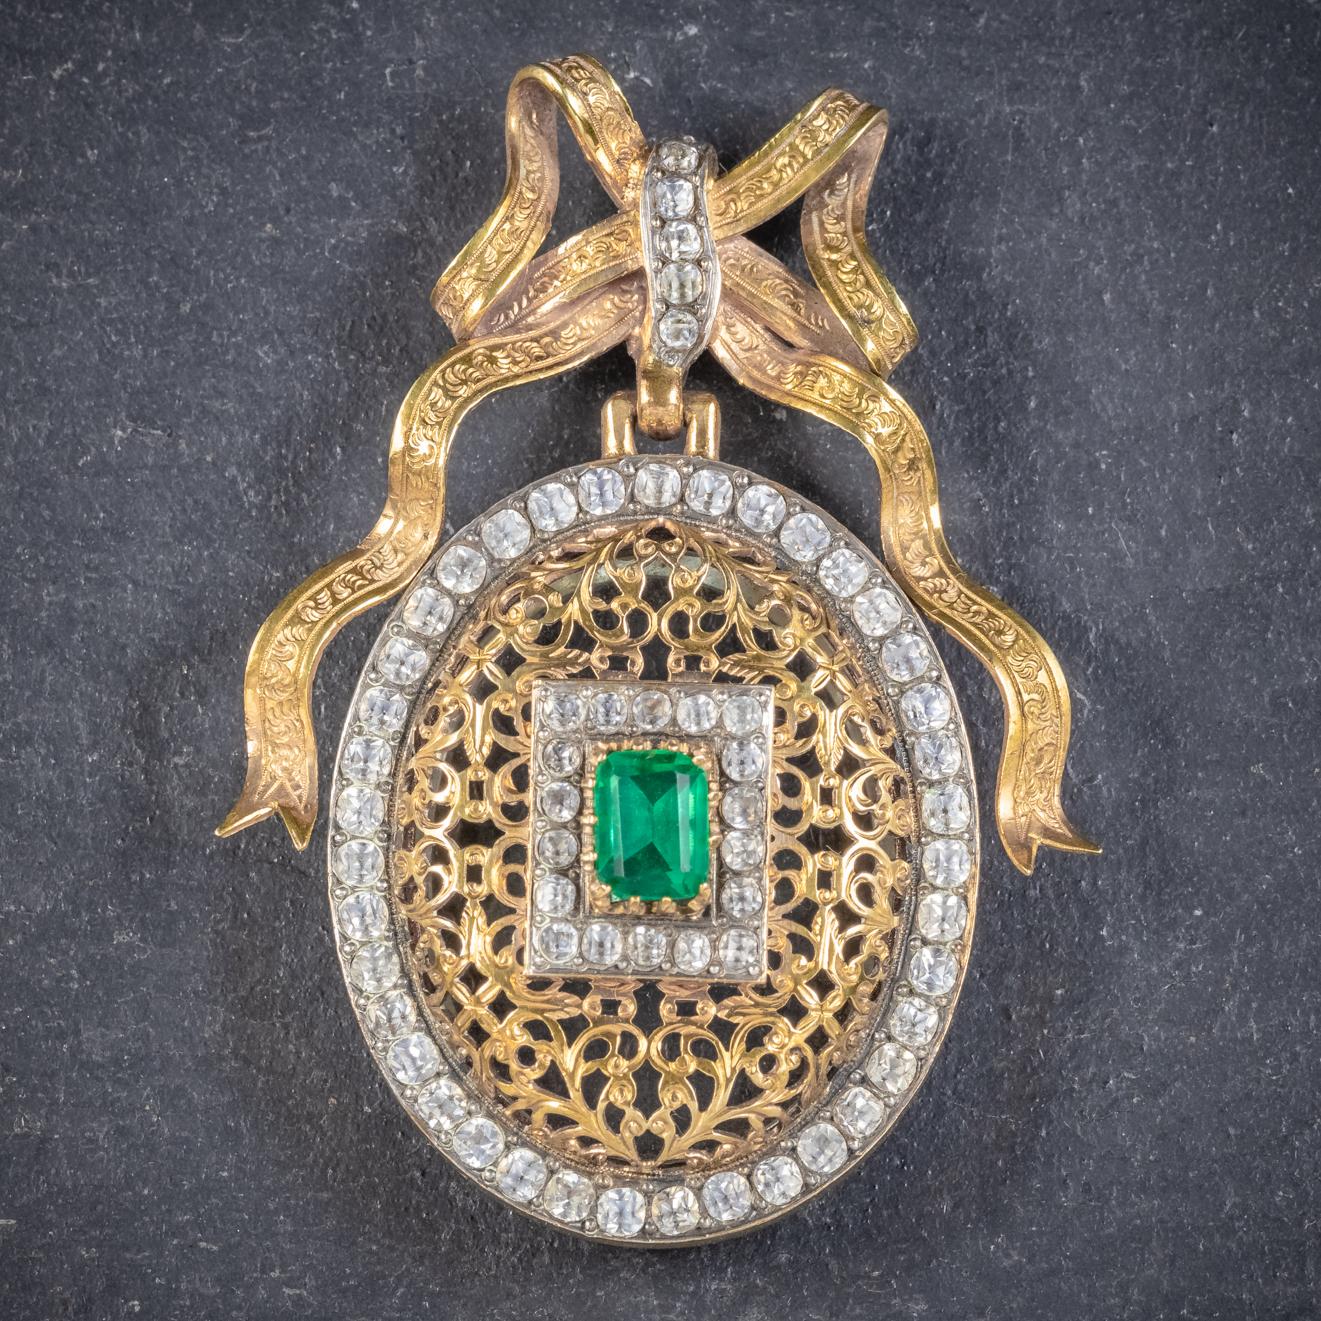 A truly fabulous antique French Paste stone locket from the Victorian era, Circa 1900. 

The lovely oval gallery is set with an emerald cut green Paste stone in the centre with two outer borders of white Pastes that simulate Diamonds. 

The lockets